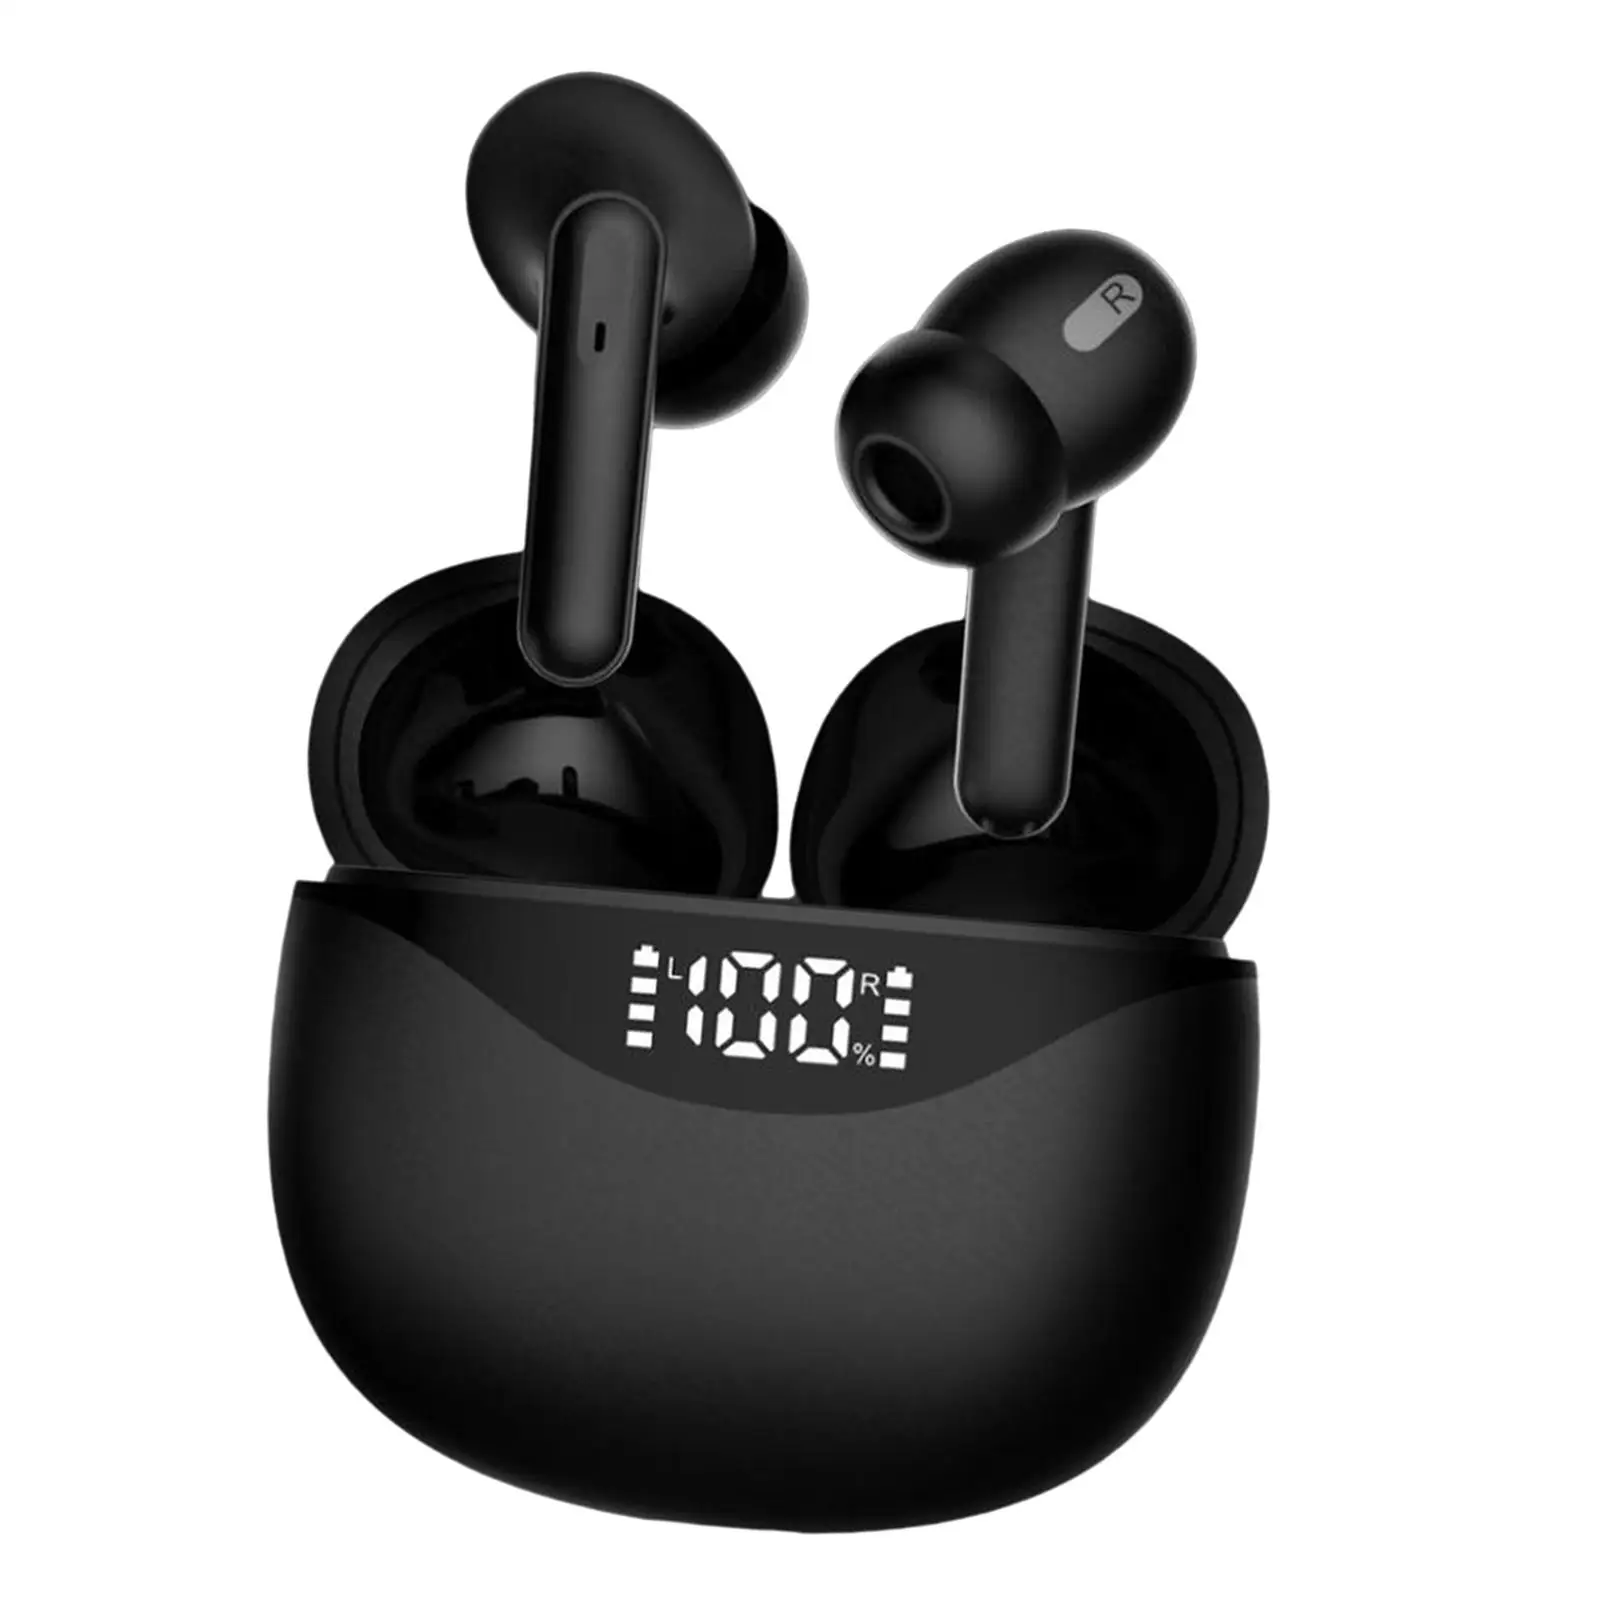 Bluetooth Headsets Waterproof HiFi HiFi Sound with LED Battery Display Earphone for Running Sports